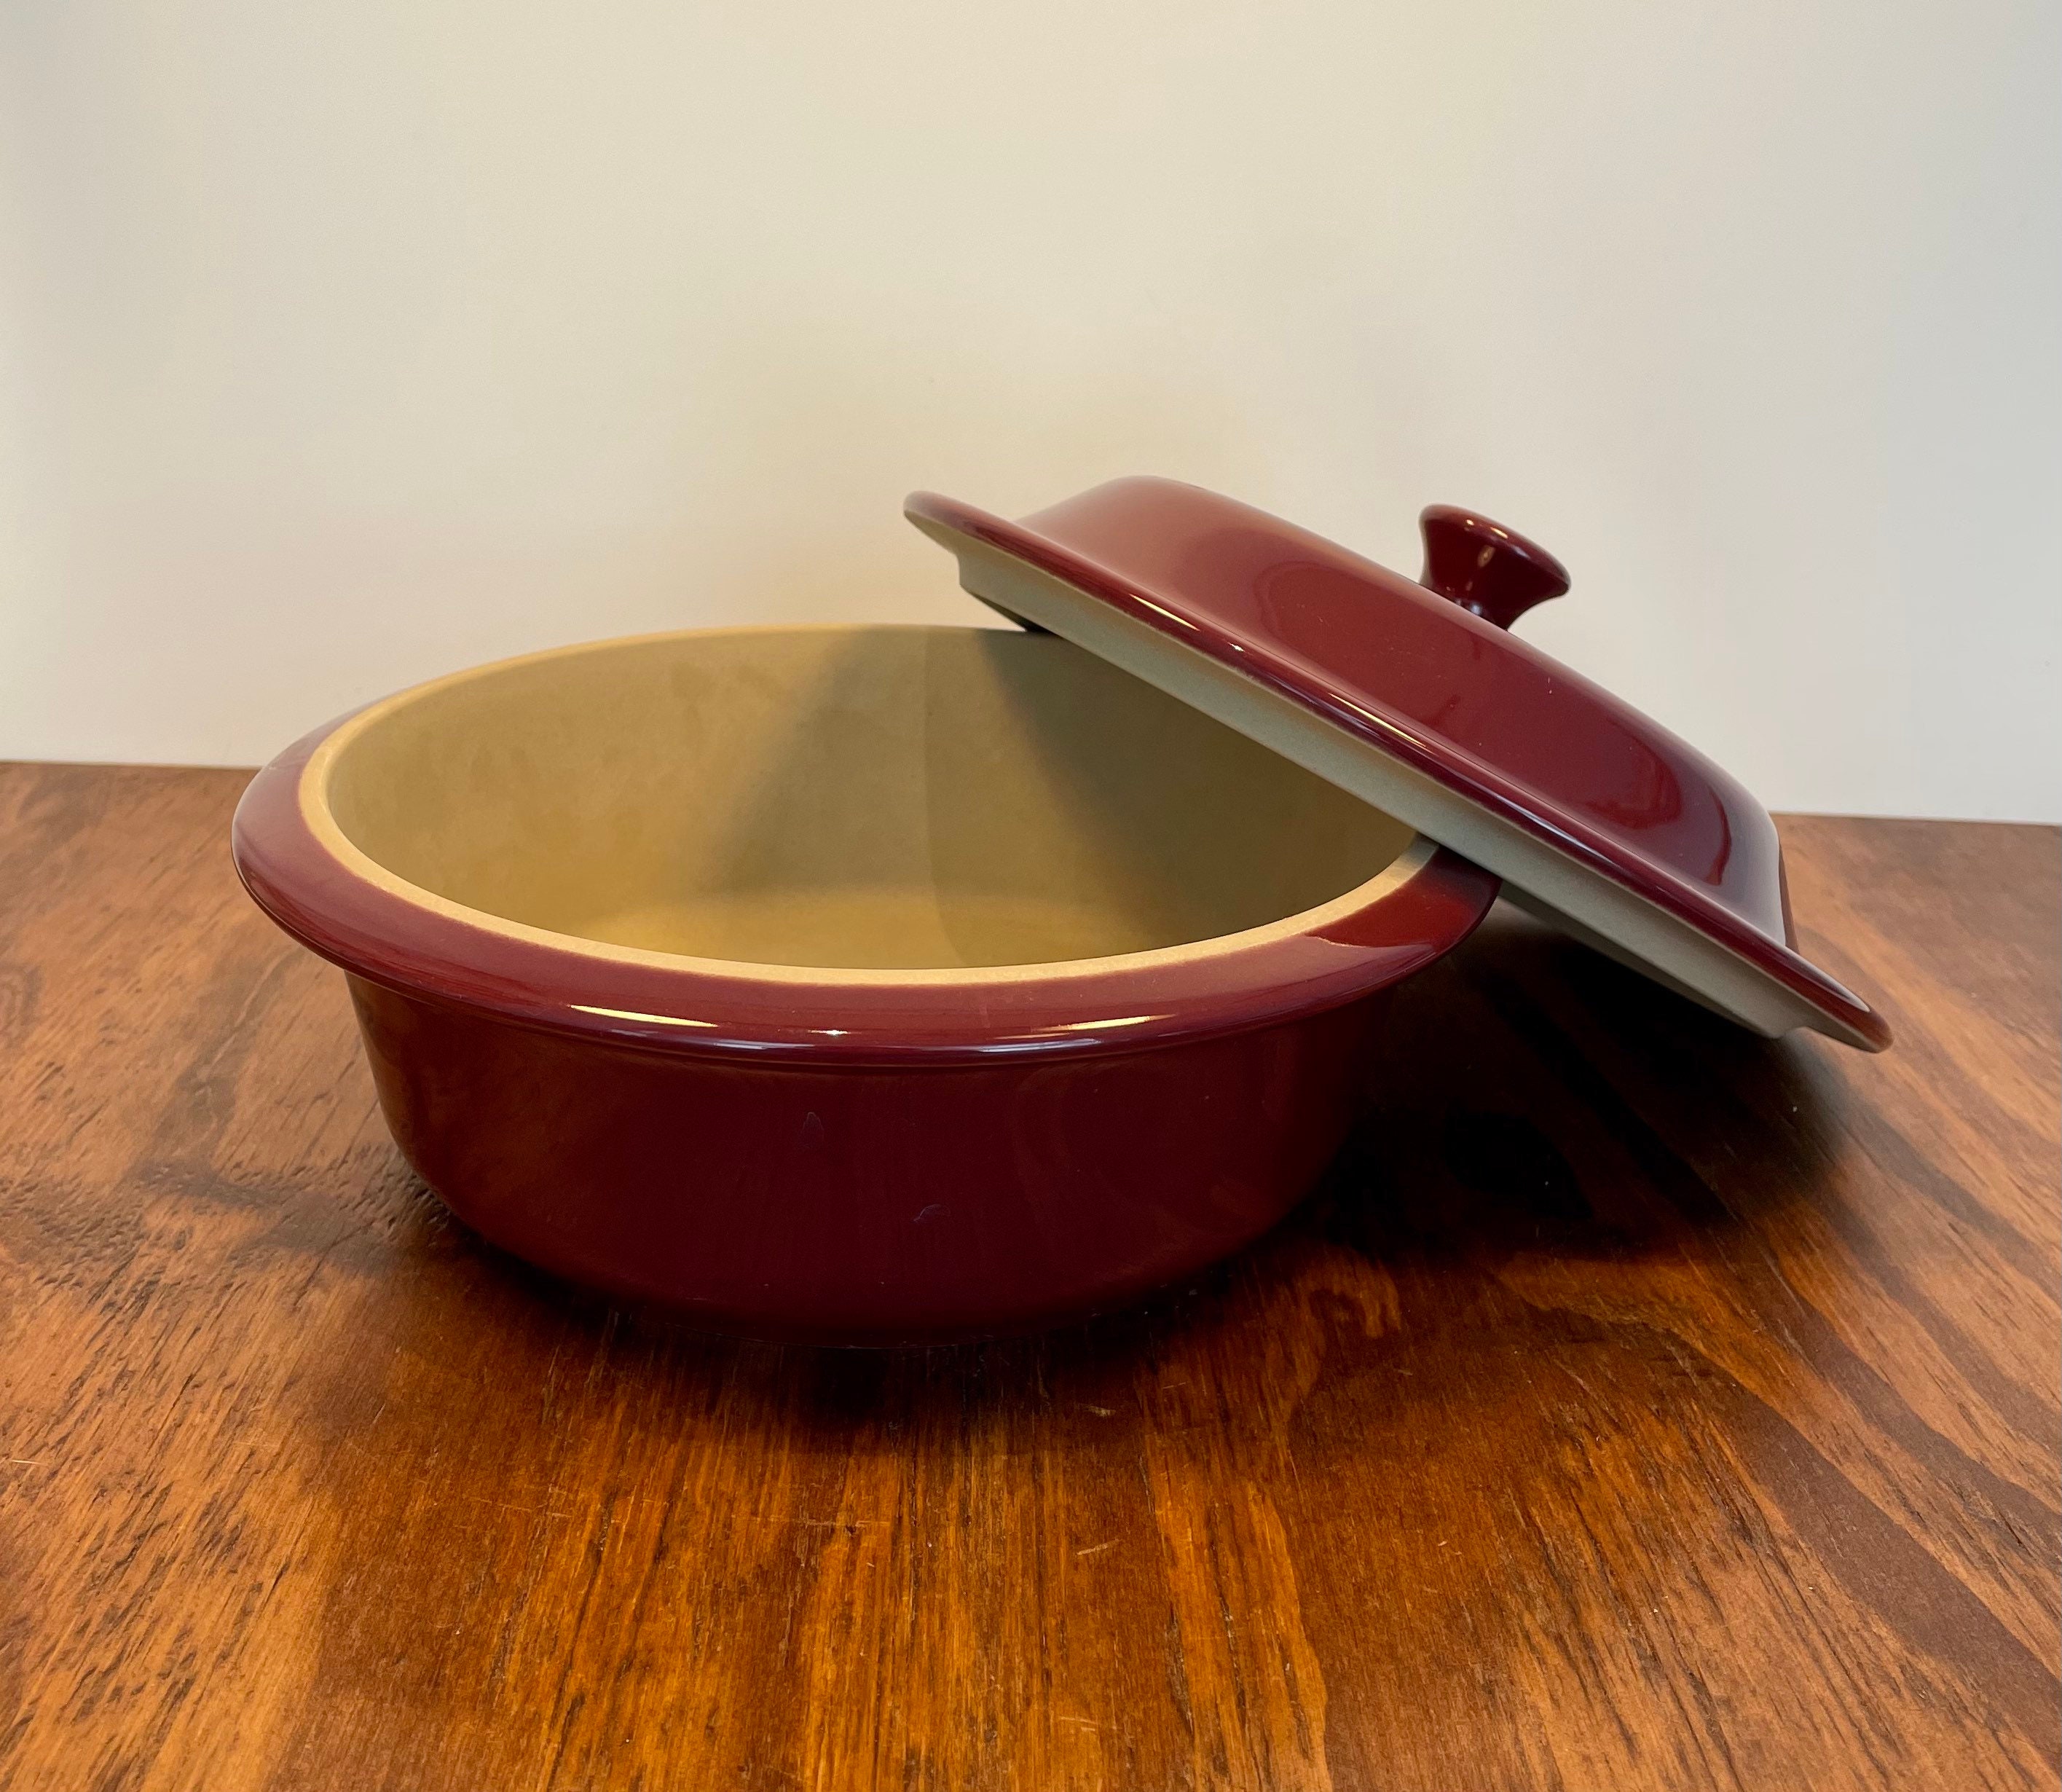 The Pampered Chef Stoneware Cranberry Red Deep Covered Oval Casserole 3.1 QT